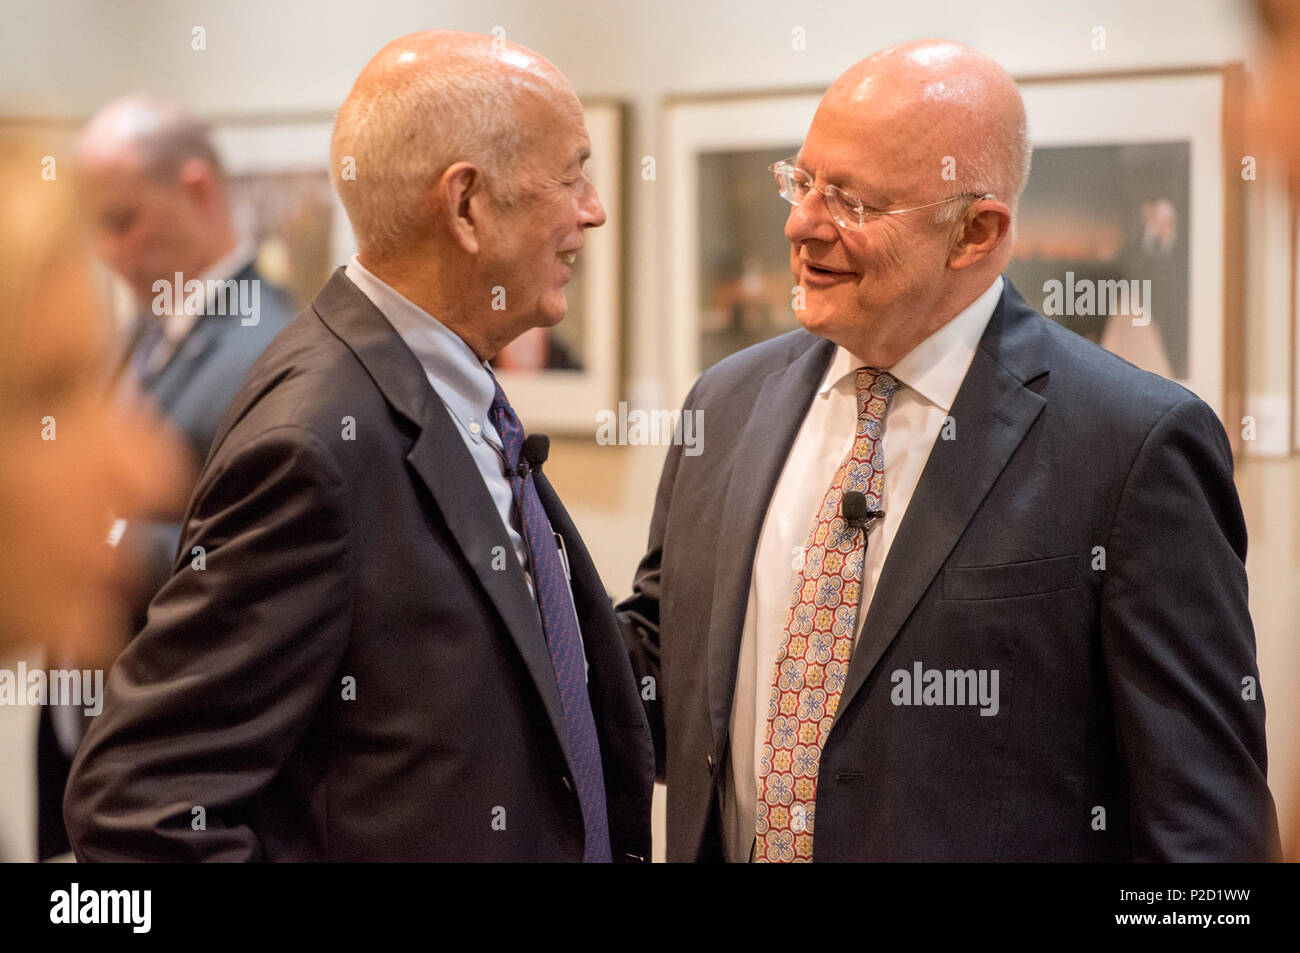 Bob Inman and James Clapper  In a speech at the LBJ Presidential Library on Thursday, Sept. 22nd, 2016, Director of National Intelligence James Clapper discussed national security as we prepare for an election year change in the White House. Following his remarks, Admiral Bob Inman, former Director of the National Security Agency and Deputy Director of the CIA, and Stephen Hadley, former National Security Advisor, joined Clapper on stage for a conversation moderated by LBJ Library Director Mark Updegrove on the pressing national security issues facing our nation.   LBJ Library photo by Jay God Stock Photo